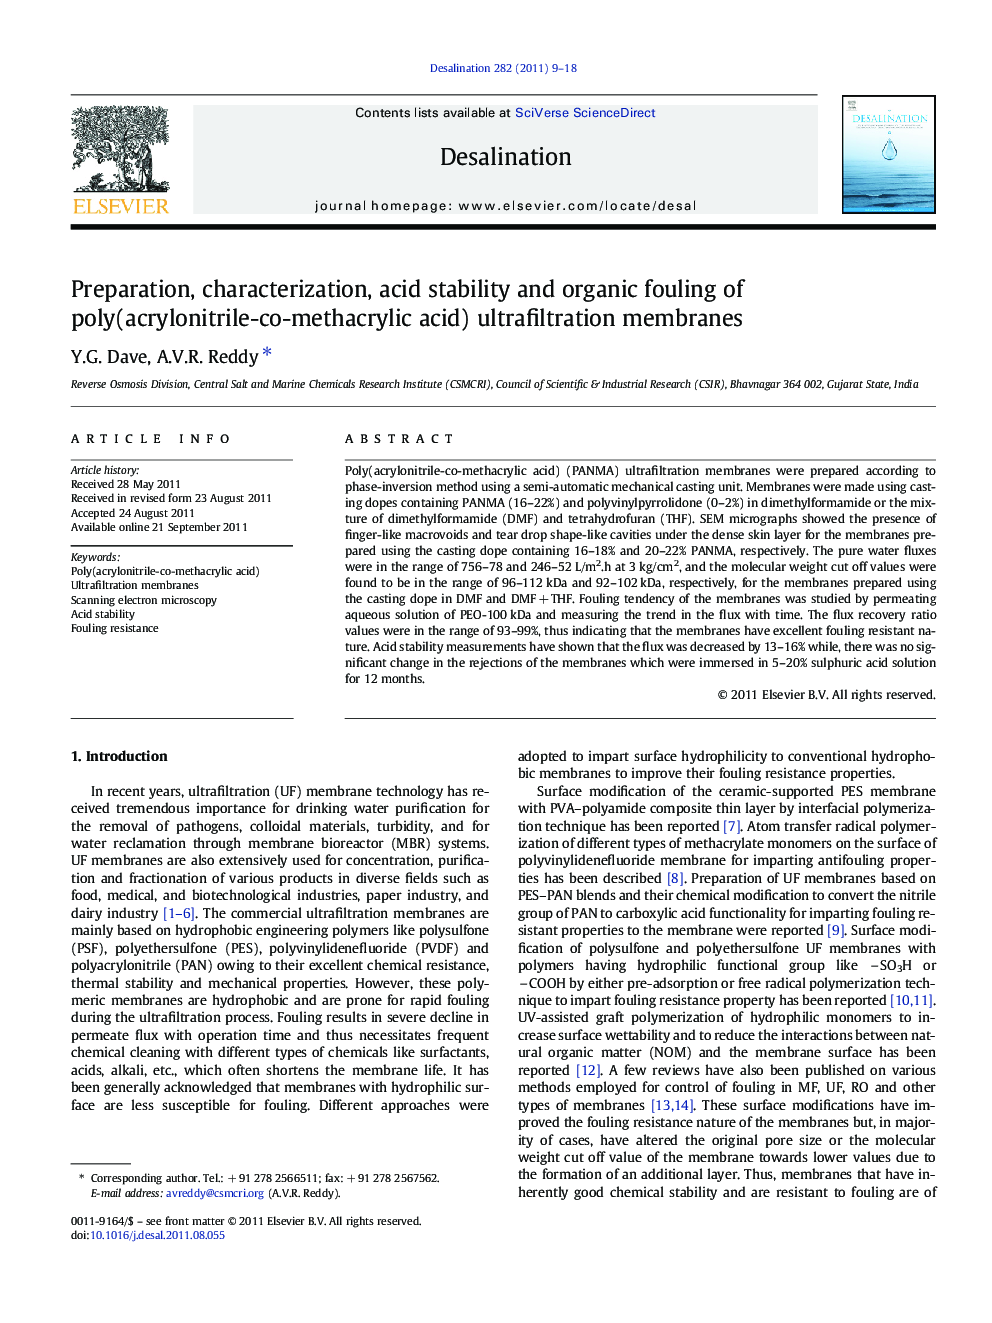 Preparation, characterization, acid stability and organic fouling of poly(acrylonitrile-co-methacrylic acid) ultrafiltration membranes